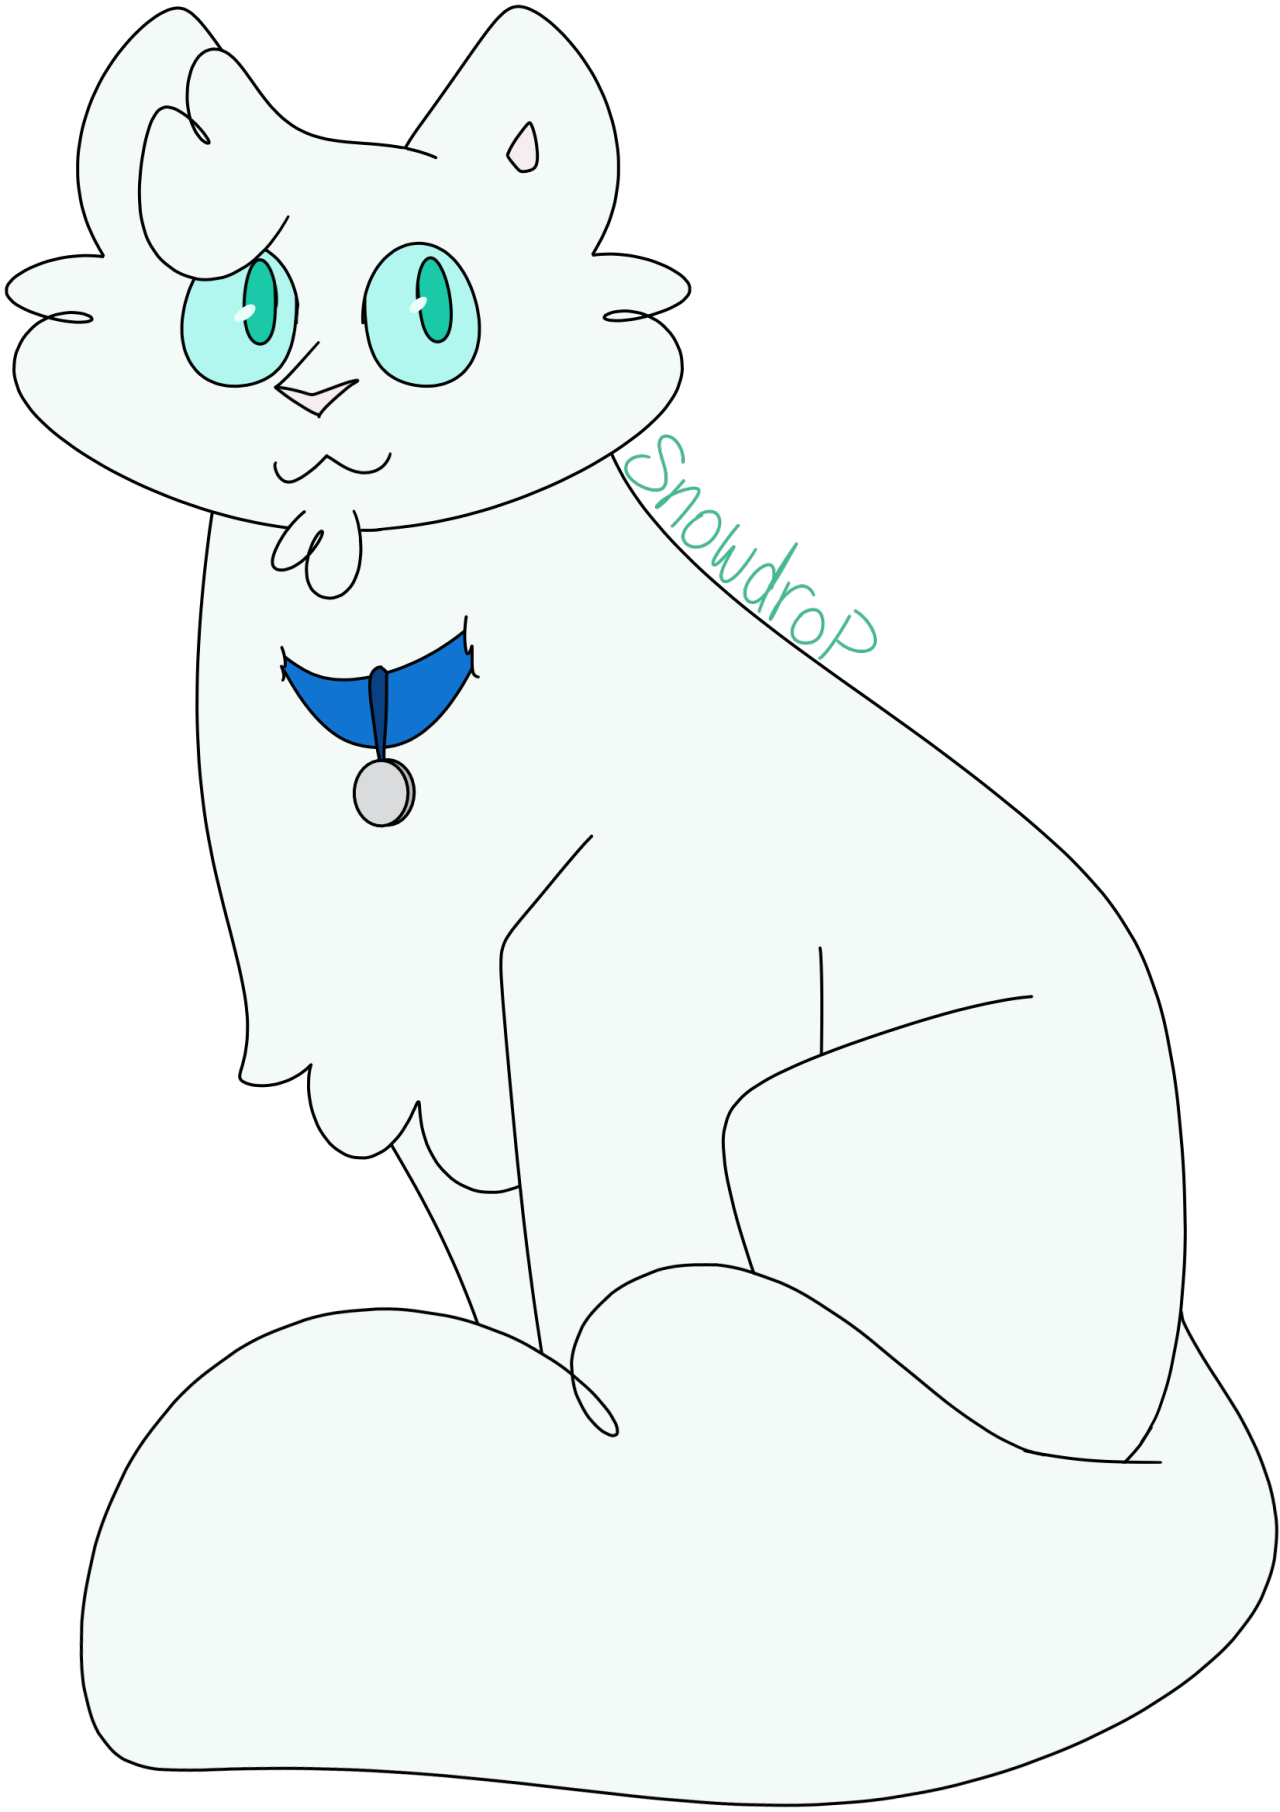 [Image Description: A digital drawing of Snowdrop from the Warrior Cats book The Fourth Apprentice. Snowdrop is a white cat with blue-green eyes, a light pink nose, and a blue collar with a silver name tag. She has a beard and light pink inside of her ear. Snowdrop is sitting with her tail curled around her legs. Above her back “Snowdrop” is written. End Description.]“It would be fun! Maybe the brown animals are dogs-- do you think so? Or giant rabbits!”Snowdrop is a small, pure white she-cat with green eyes. #snowdrop#kittypet#ghost cat#s names#molly #omen of the stars #image description#designs